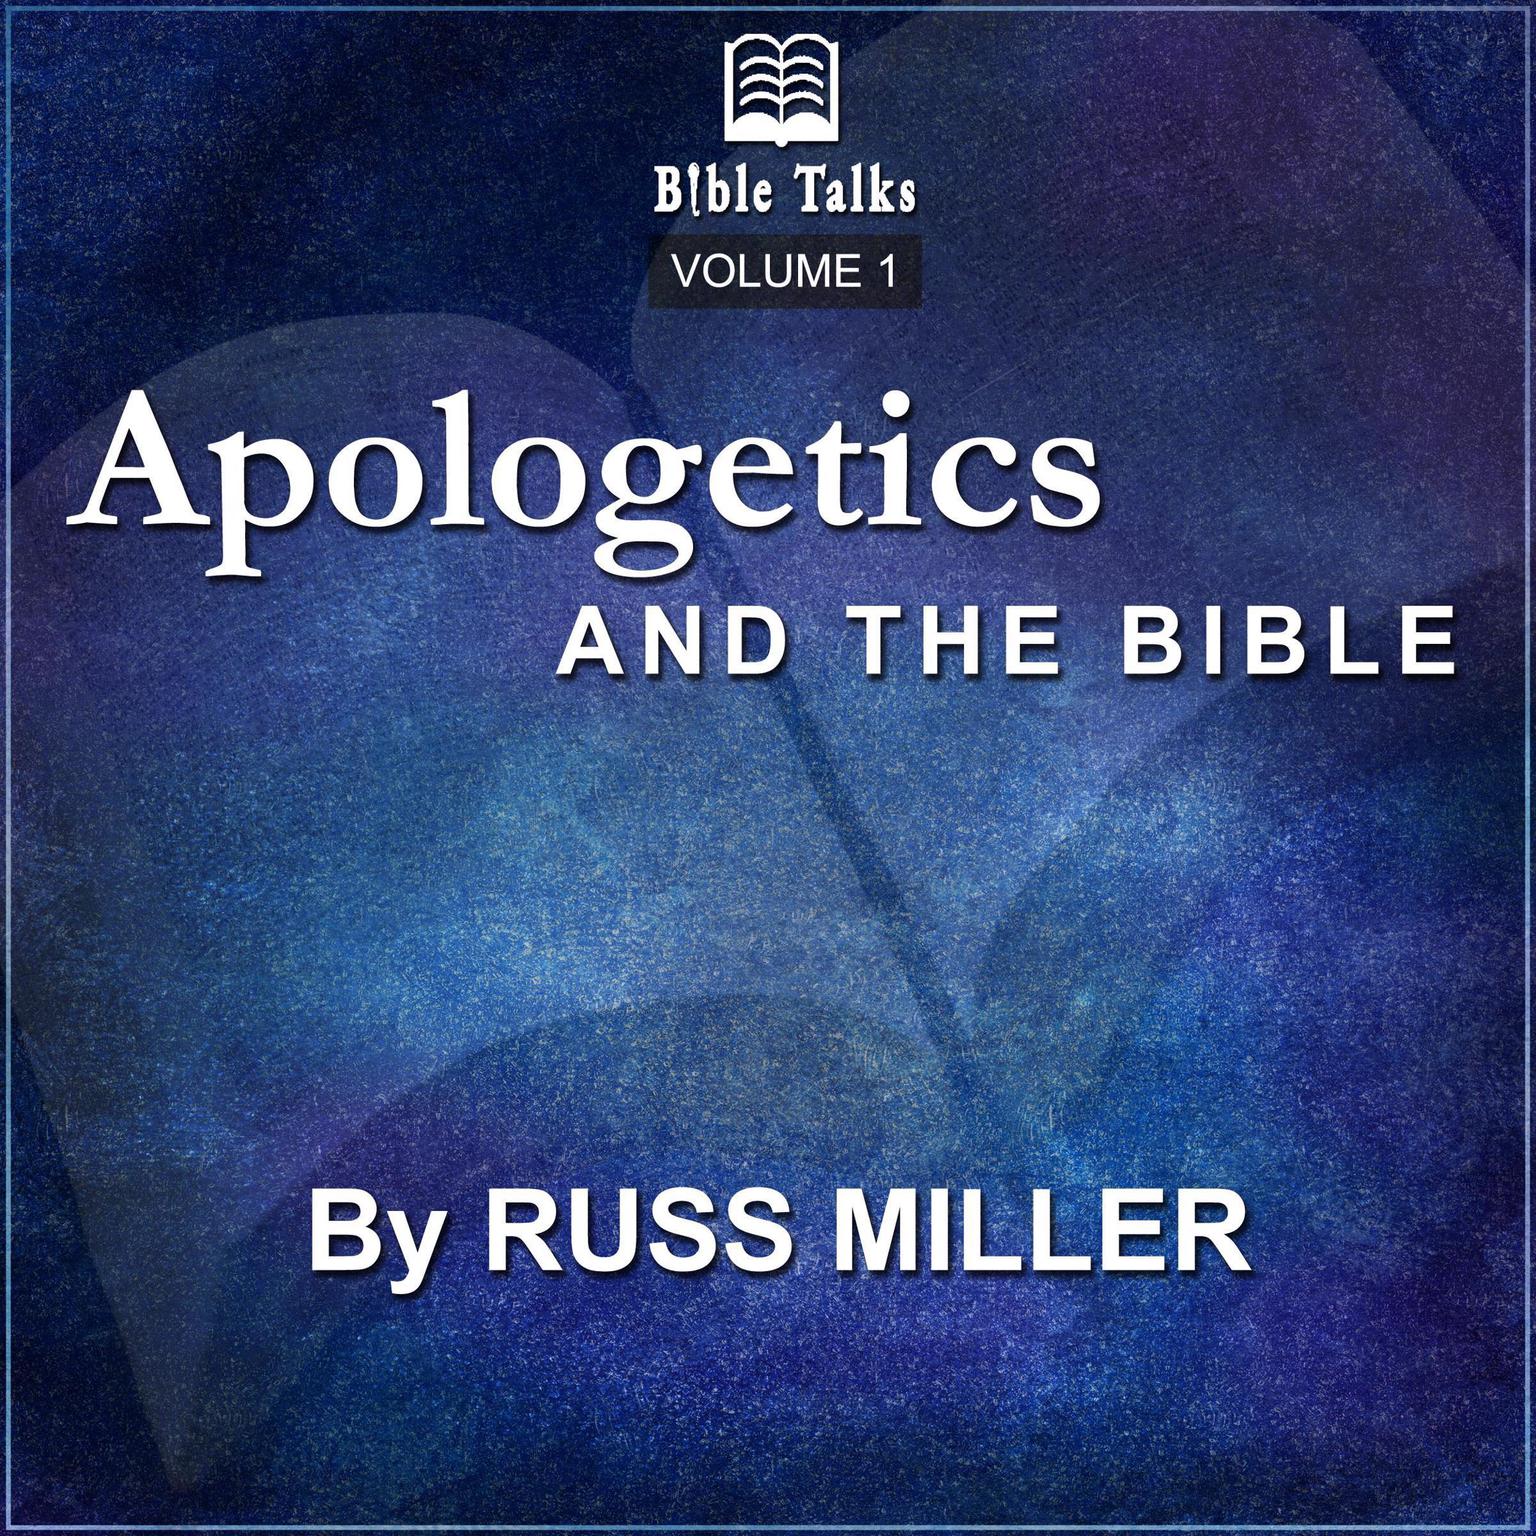 Apologetics And The Bible - Volume 1 Audiobook, by Russ Miller